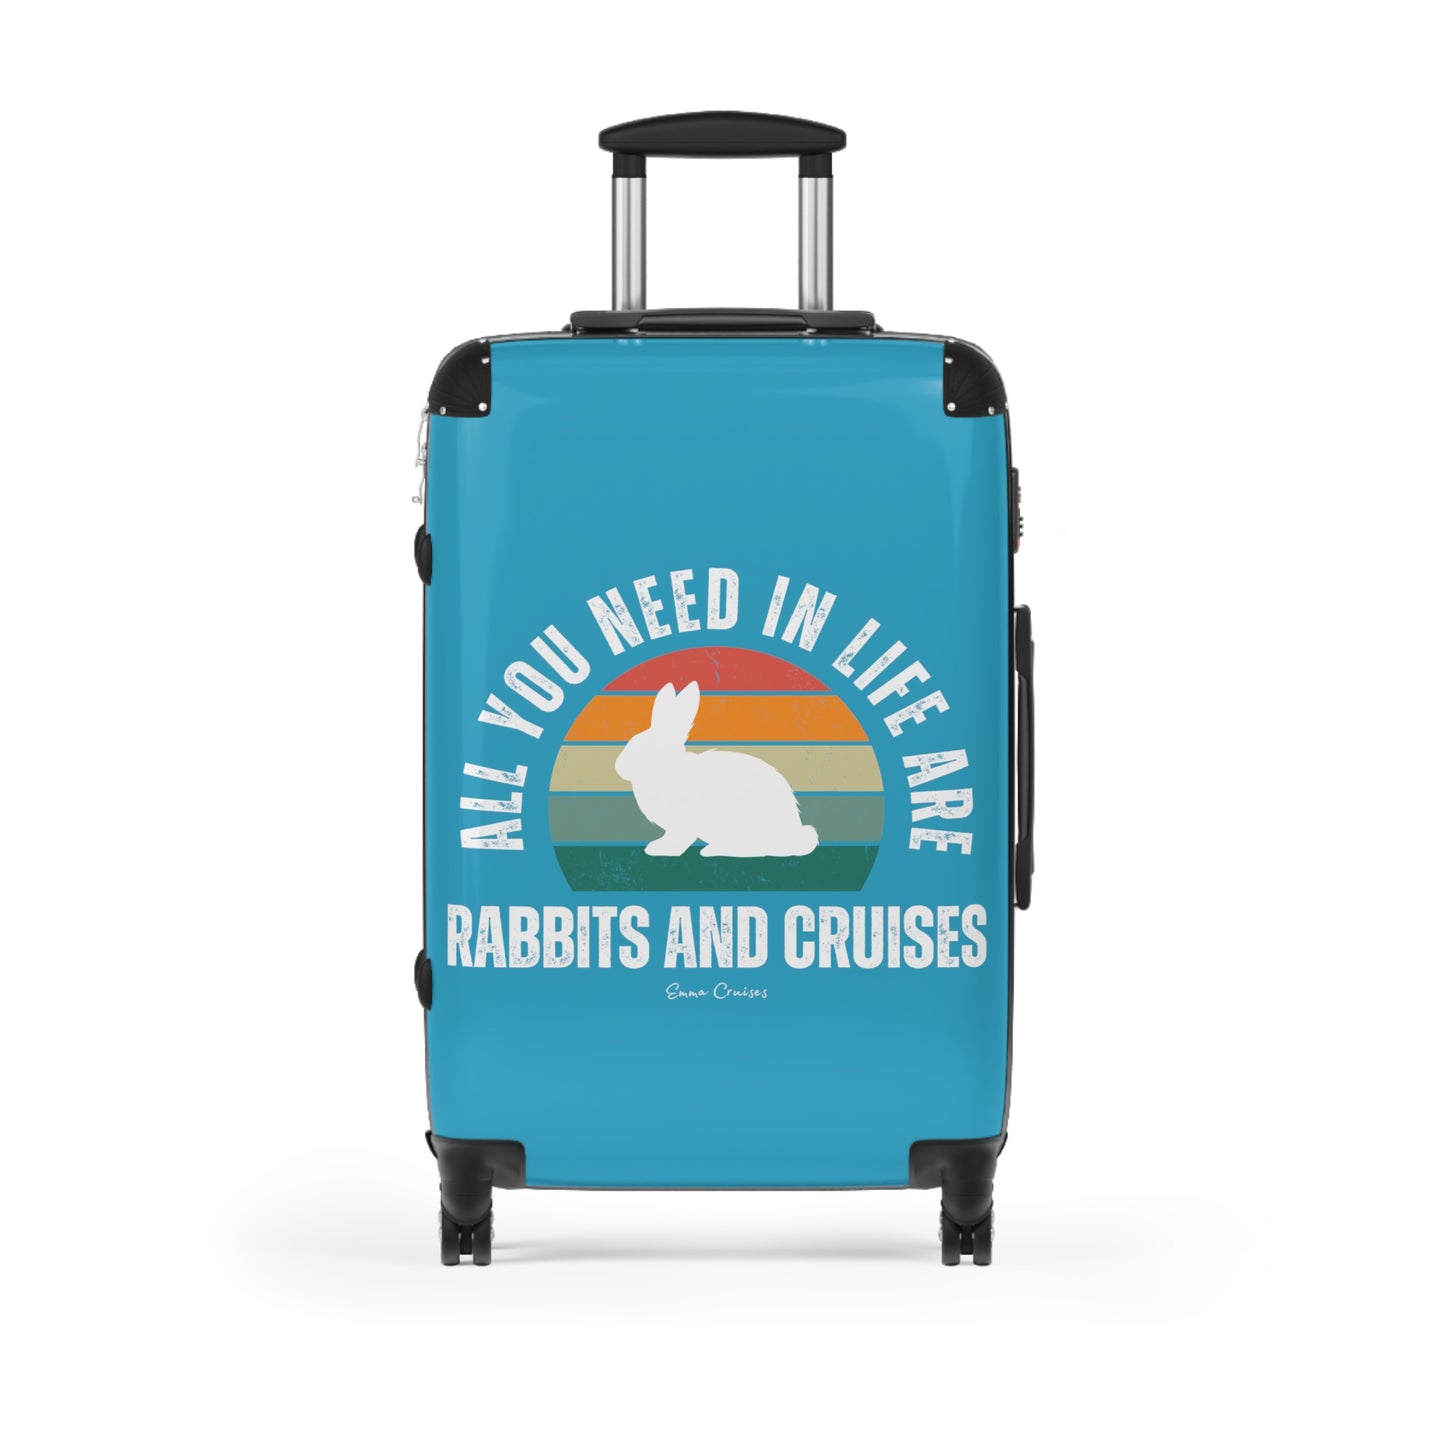 Rabbits and Cruises - Suitcase